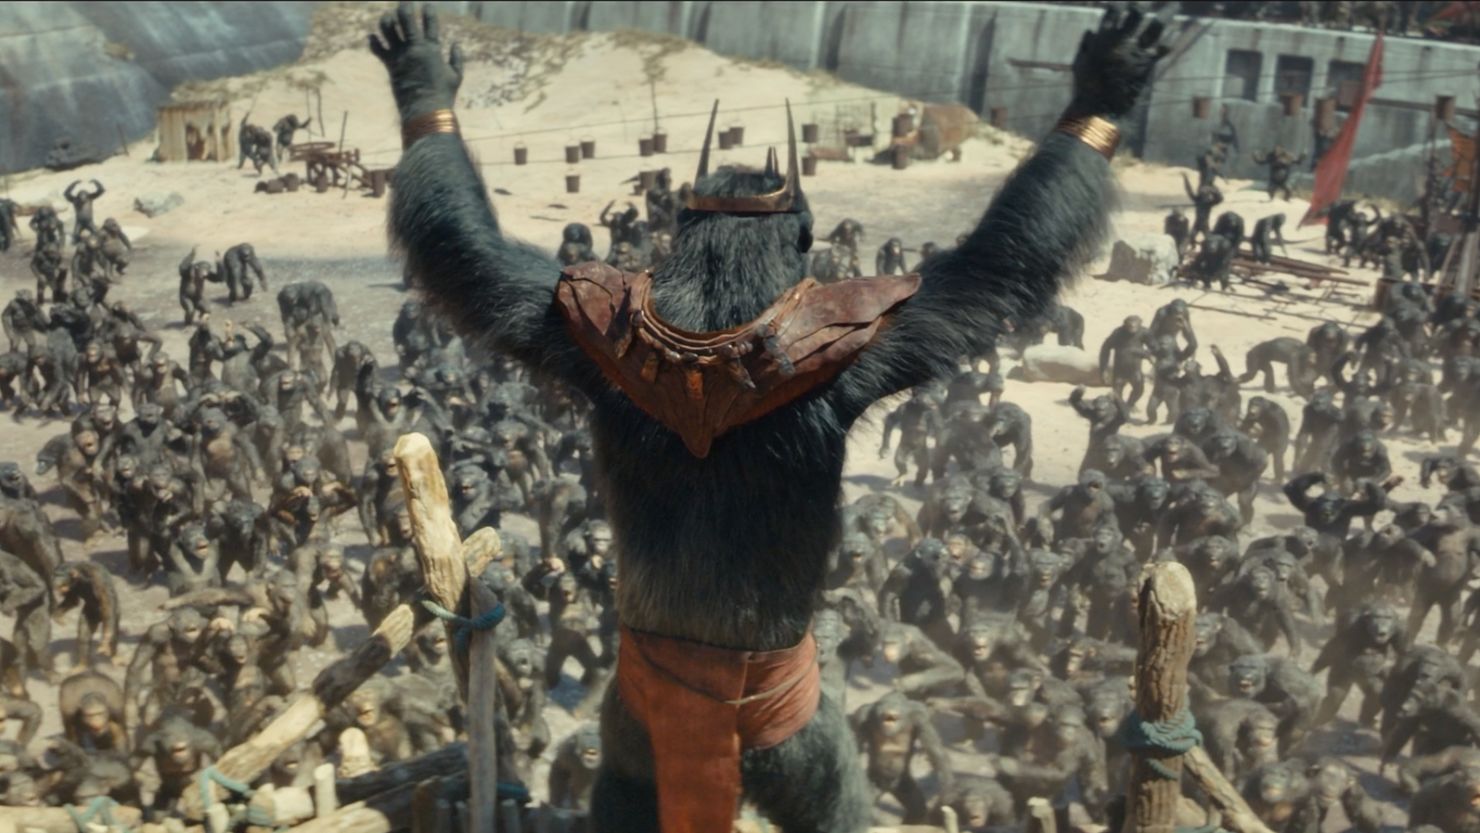 ‘Kingdom of the of the Apes’ trailer CNN